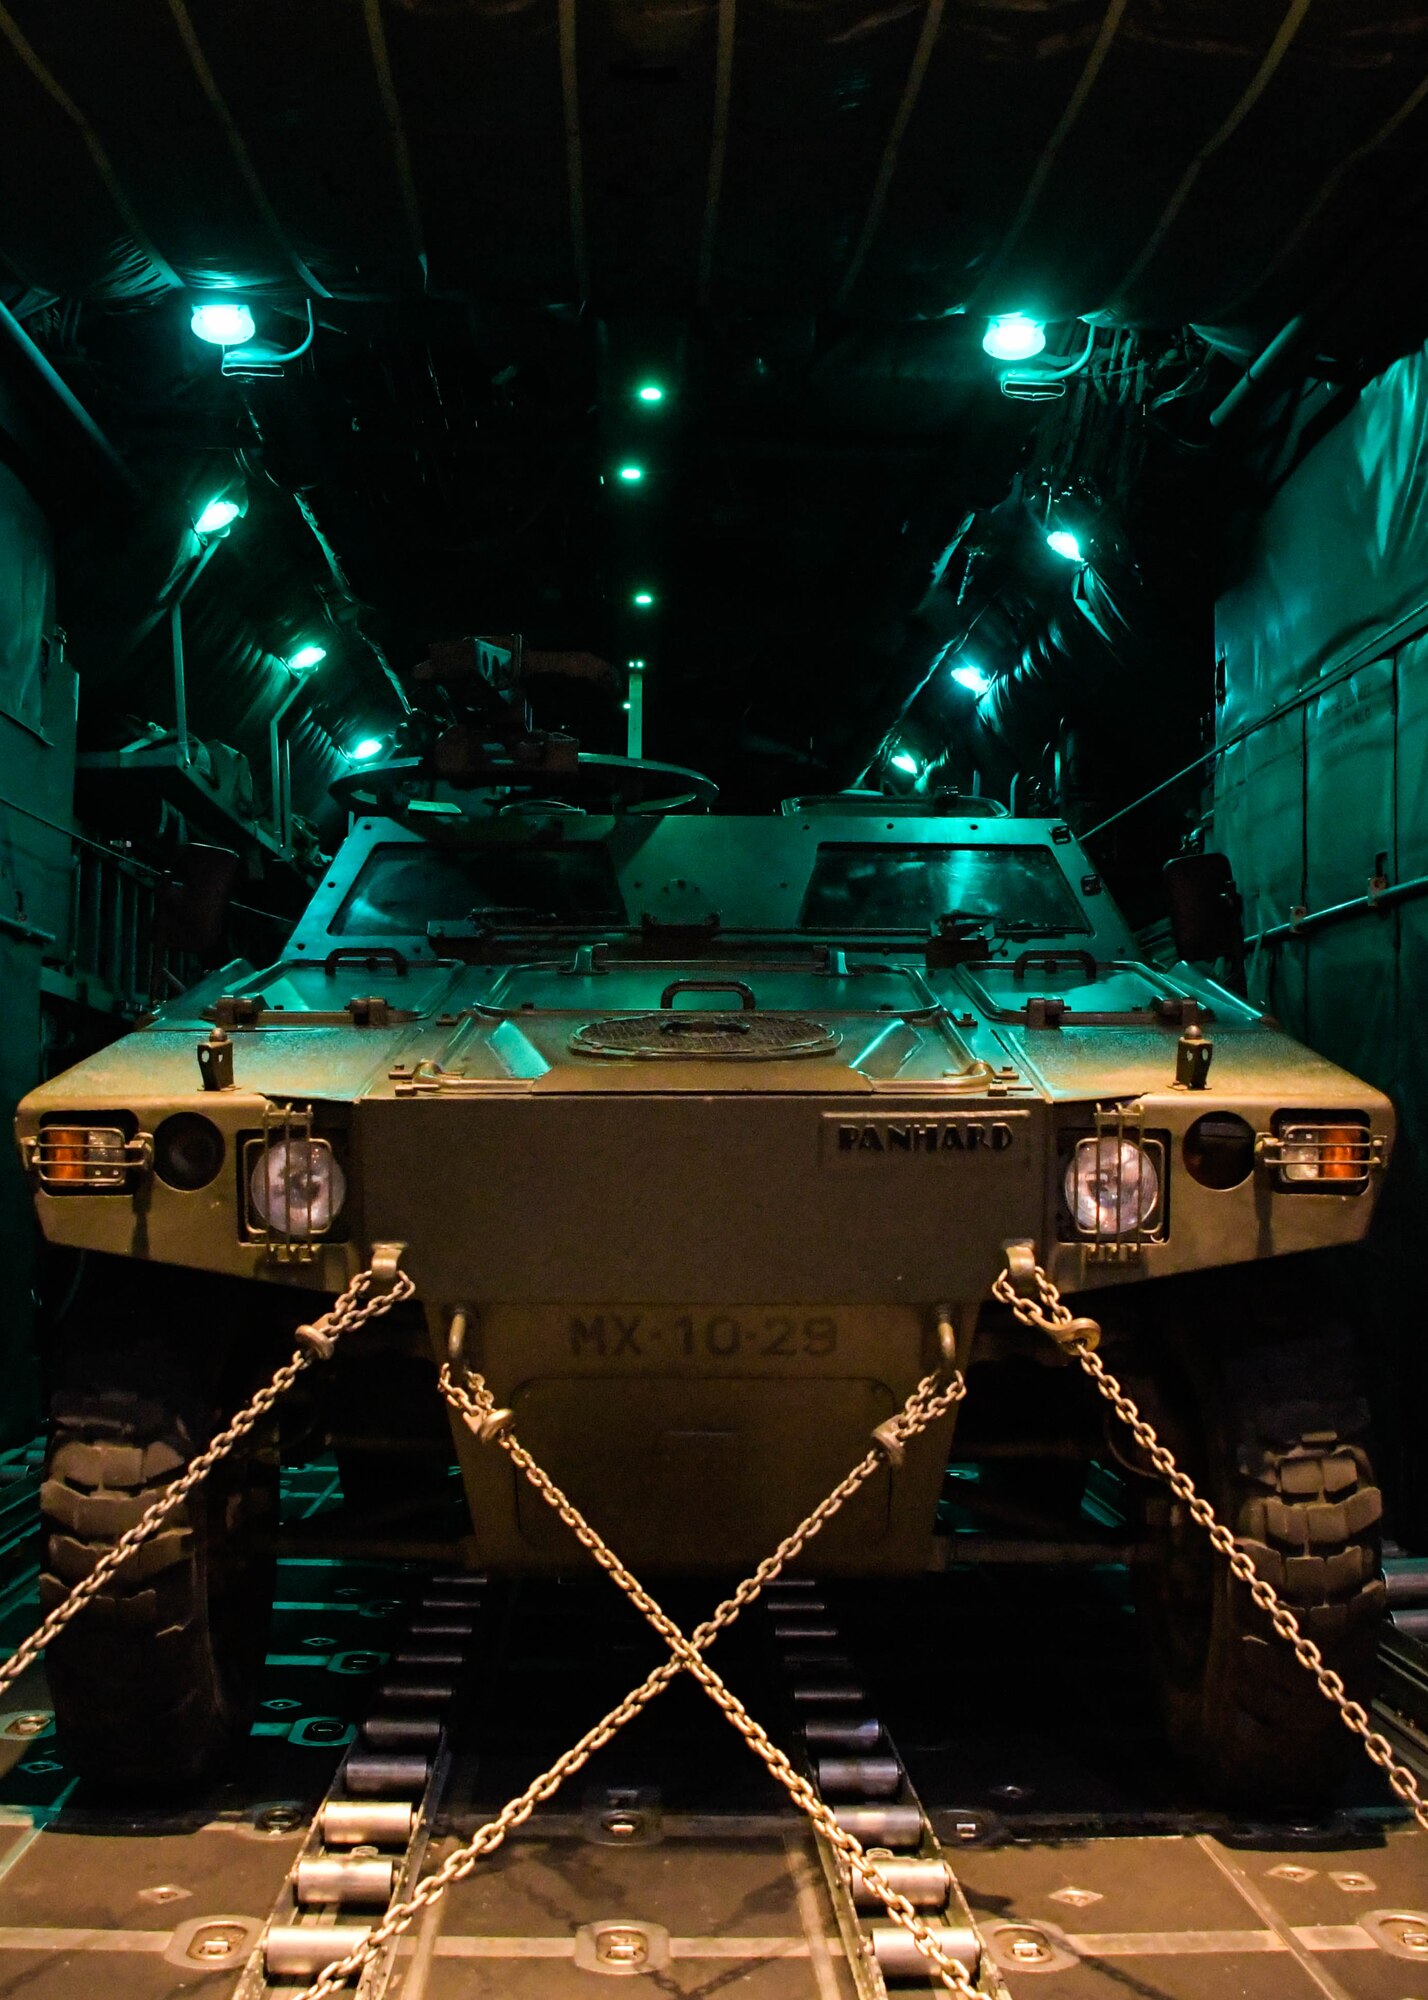 A Portuguese M-11D Light Reconnaissance Vehicle is strapped into a C-130H3 from Dobbins Air Reserve Base, Georgia, before taking off for a Night Tactical Air-Land Mission during Exercise Real Thaw 2019 at Beja Air Base, Portugal, Oct. 2, 2019. Real Thaw is a Portuguese-led large joint and combined force exercise held annually where Dobbins provided aerial support. (U.S. Air Force photo/Senior Airman Josh Kincaid)